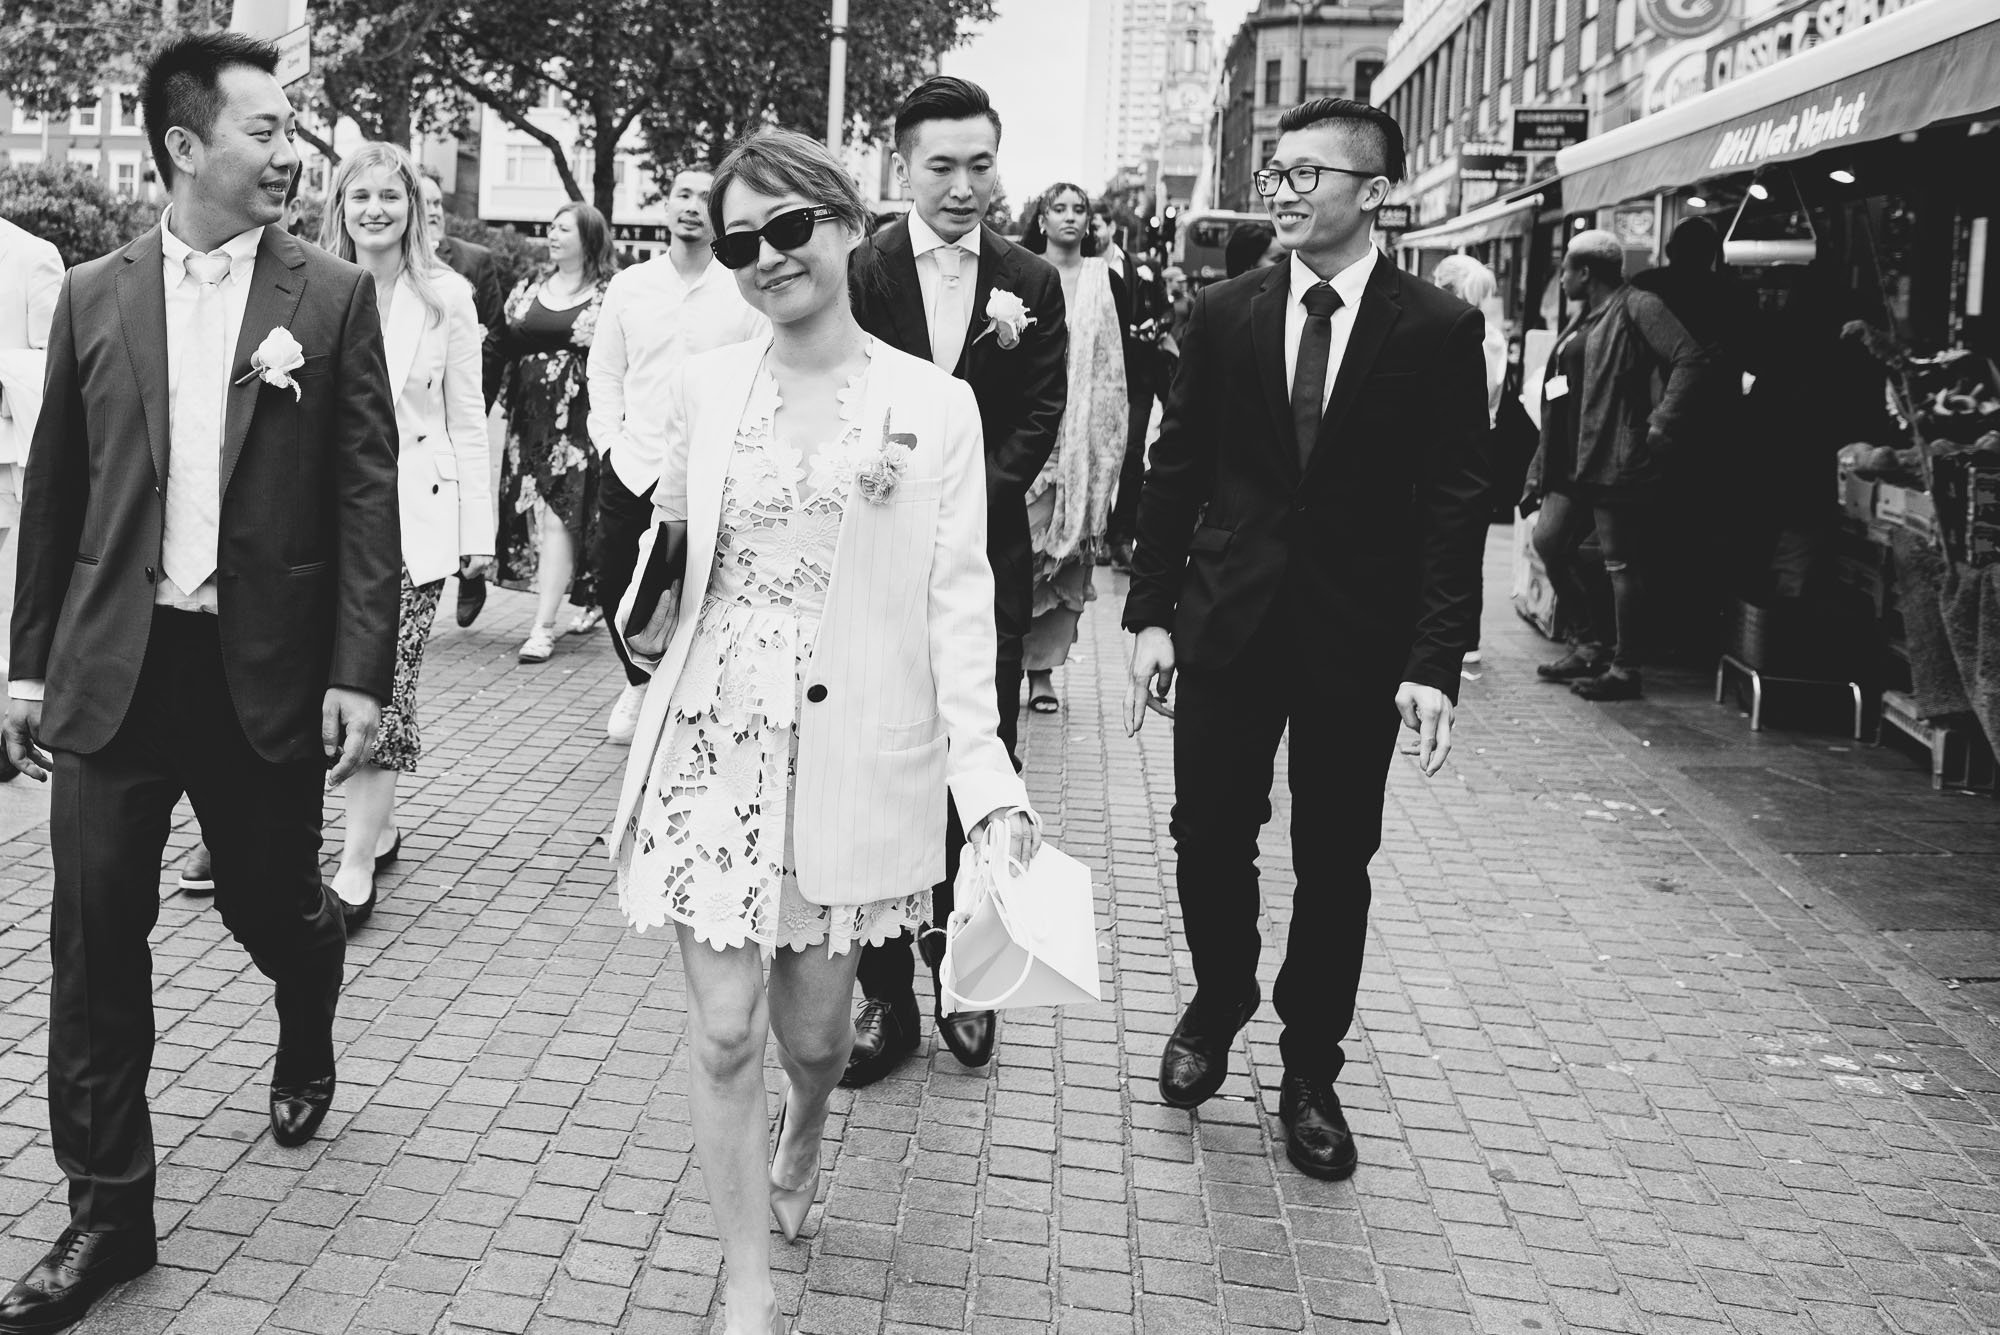 wedding-guests-greenwich-london-walking-to-venue-natural-wedding-photography-brighton-hove-reportage-style.jpg